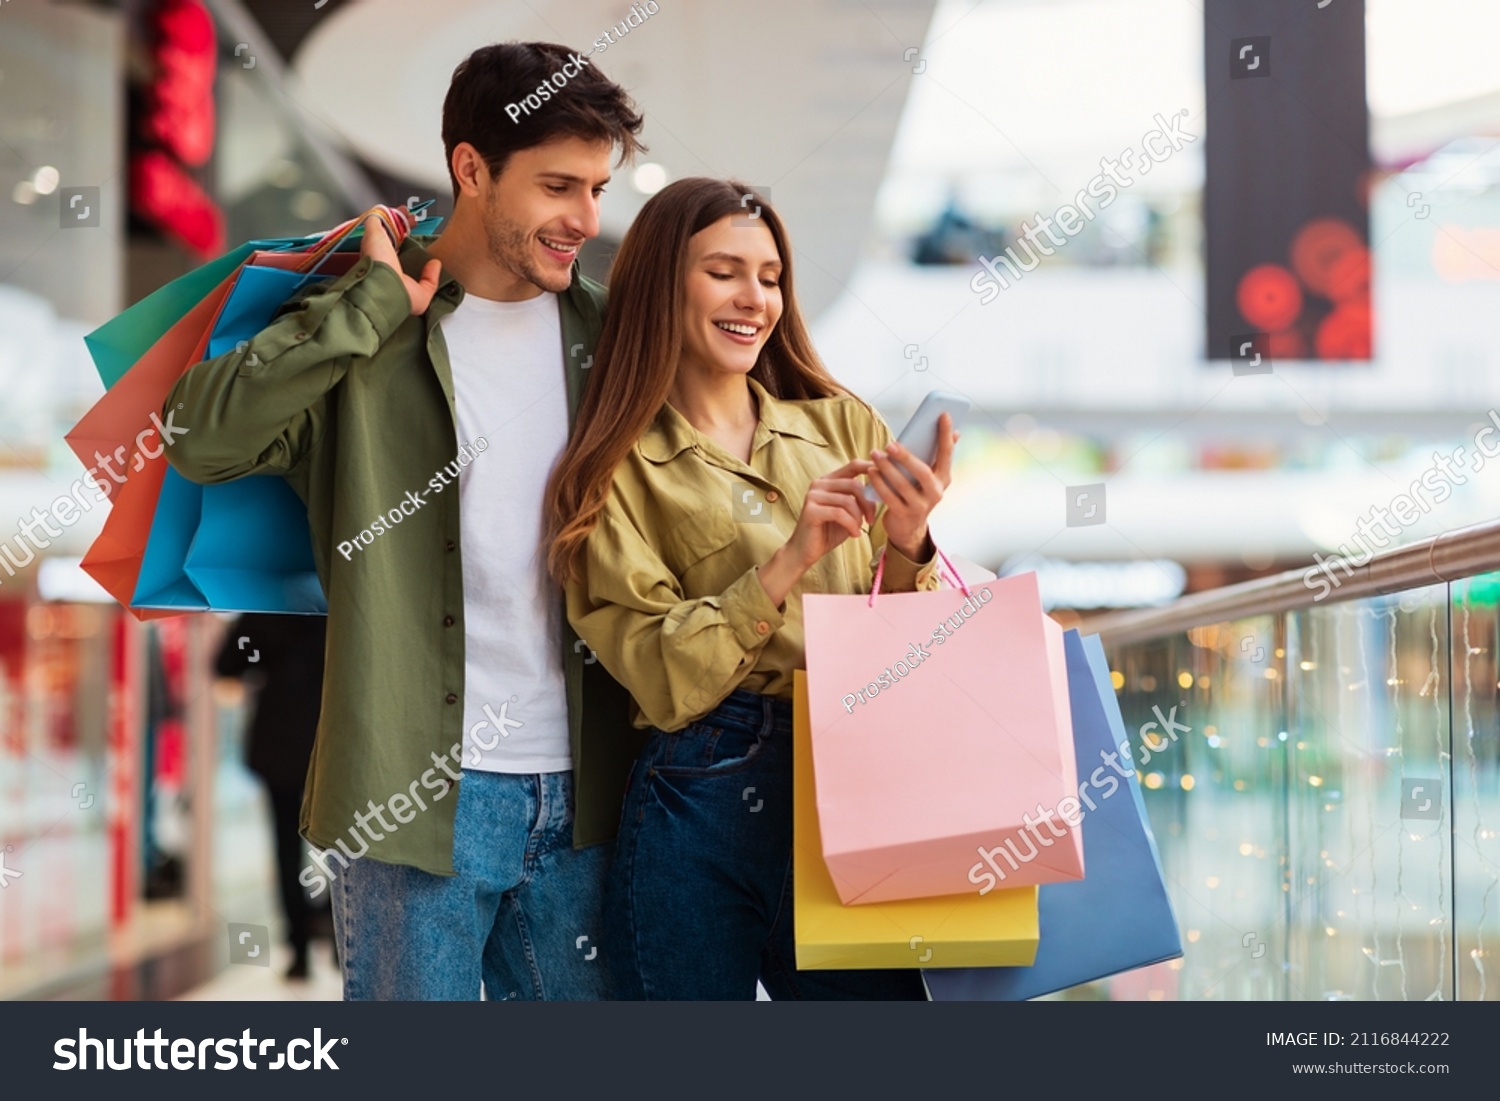 Buyers Couple Shopping Using Cellphone Holding Colorful Shopper Bags Standing In Mall. Happy Customers Using Application Purchasing Clothes Online Via Smartphone. Ecommerce And Shopaholism #2116844222